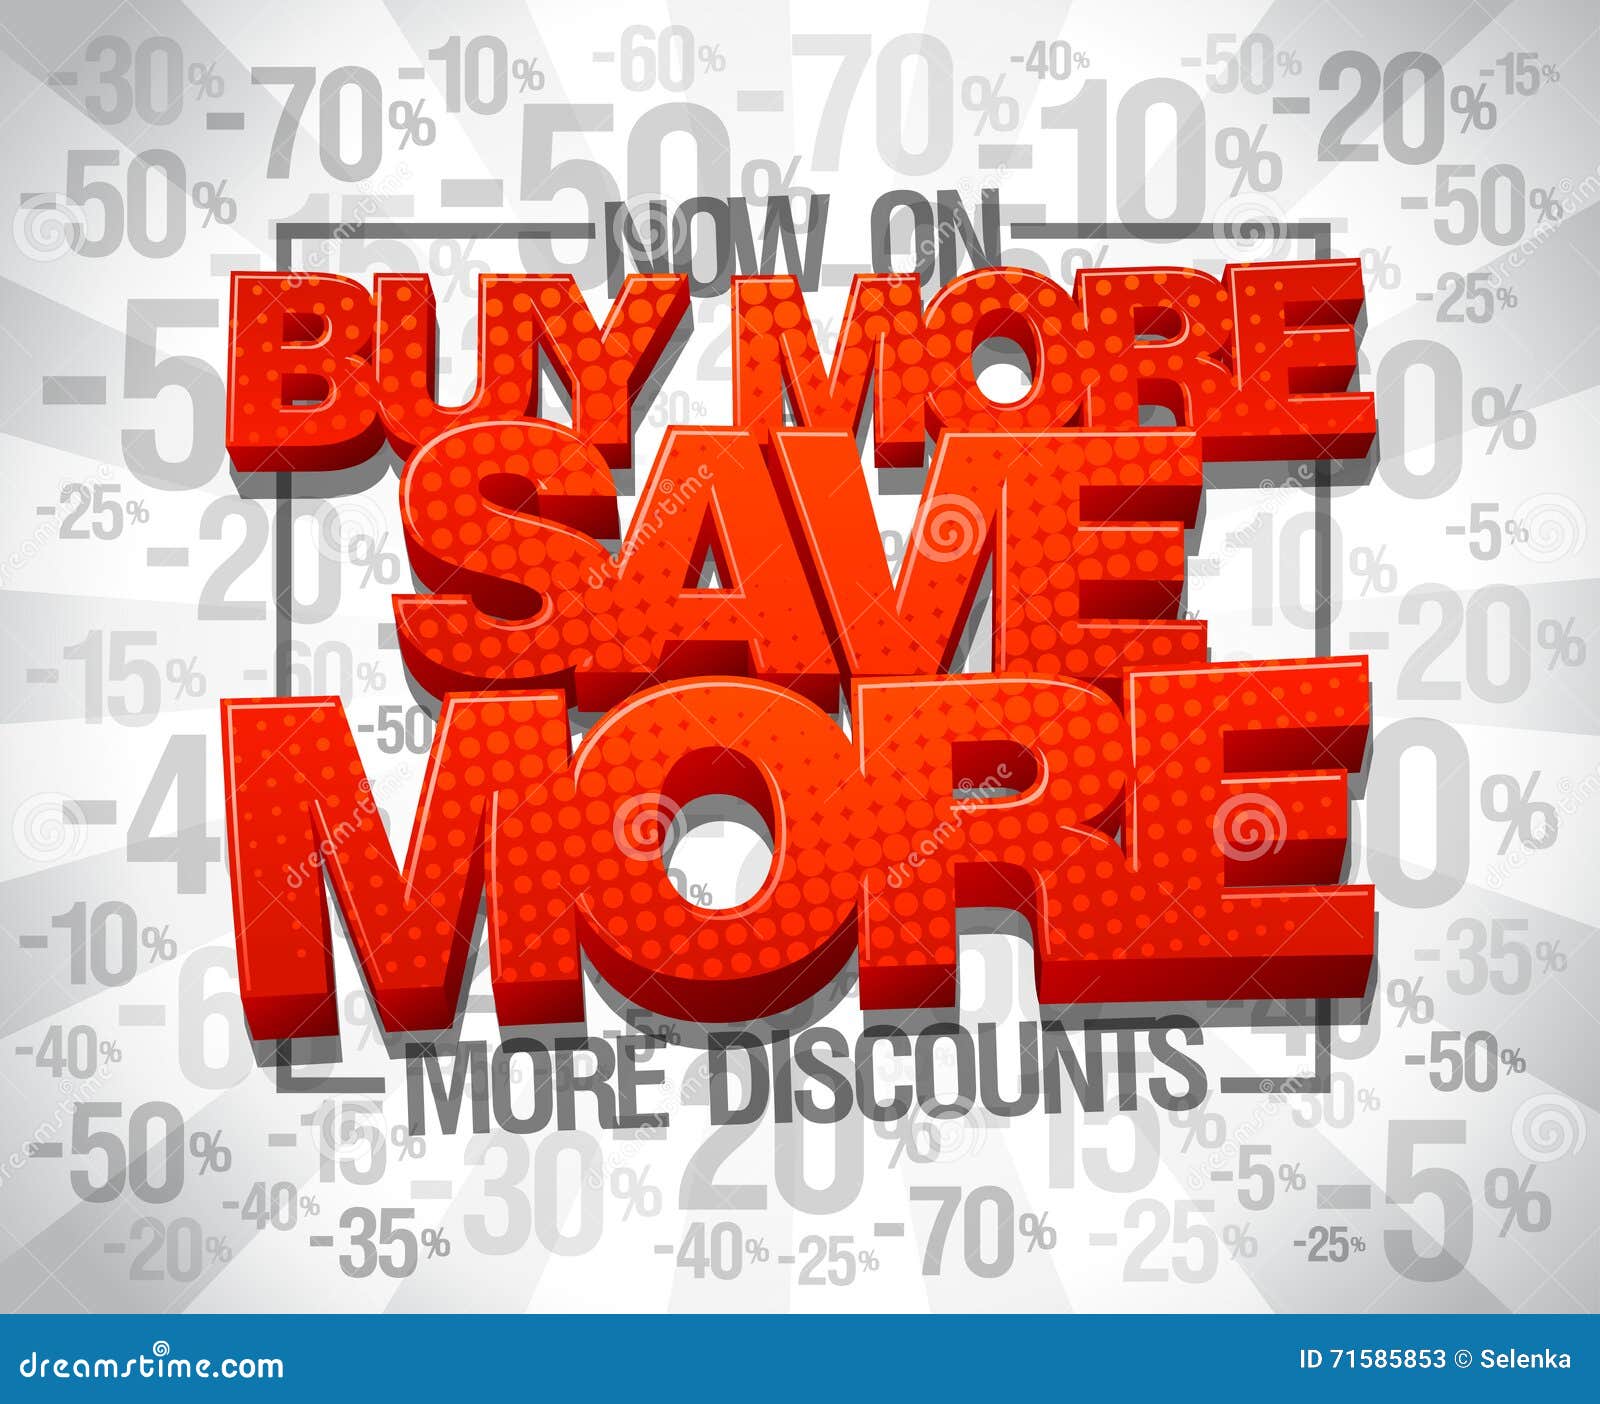 More Discounts Now On, Buy More Save More Stock Vector - Illustration ...